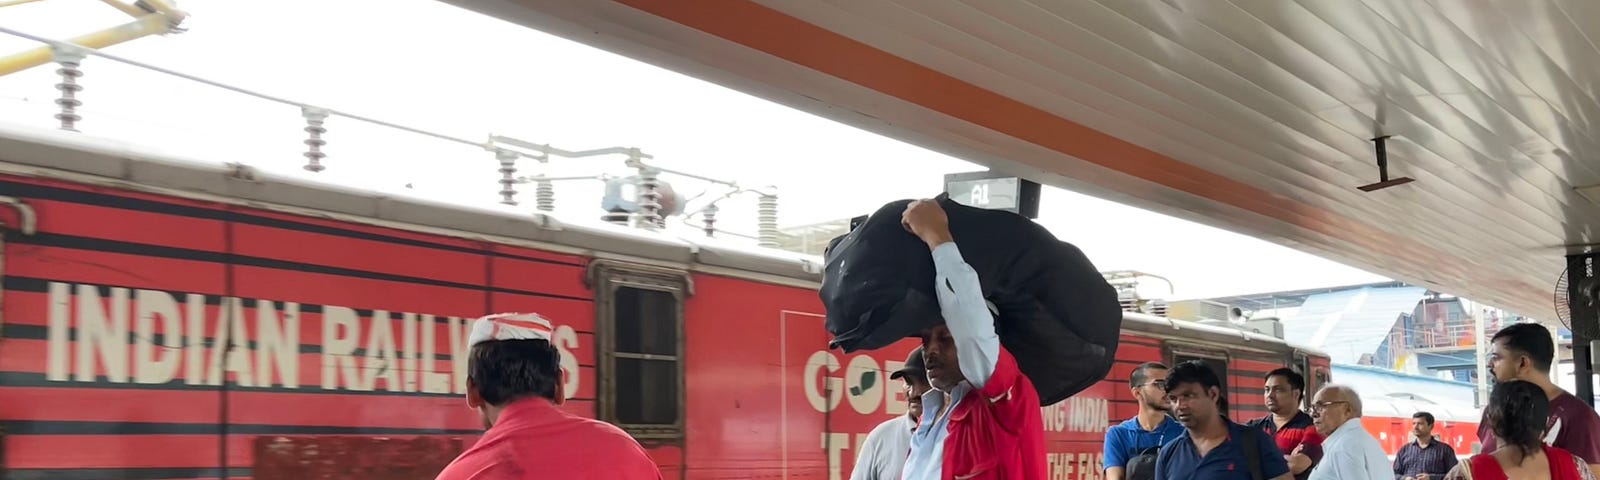 Railway platform with a train that has arrived. The train says “Indian Railways.” C couple of coolies/porters are loading luggage. Other people are wheeling their suitcases.